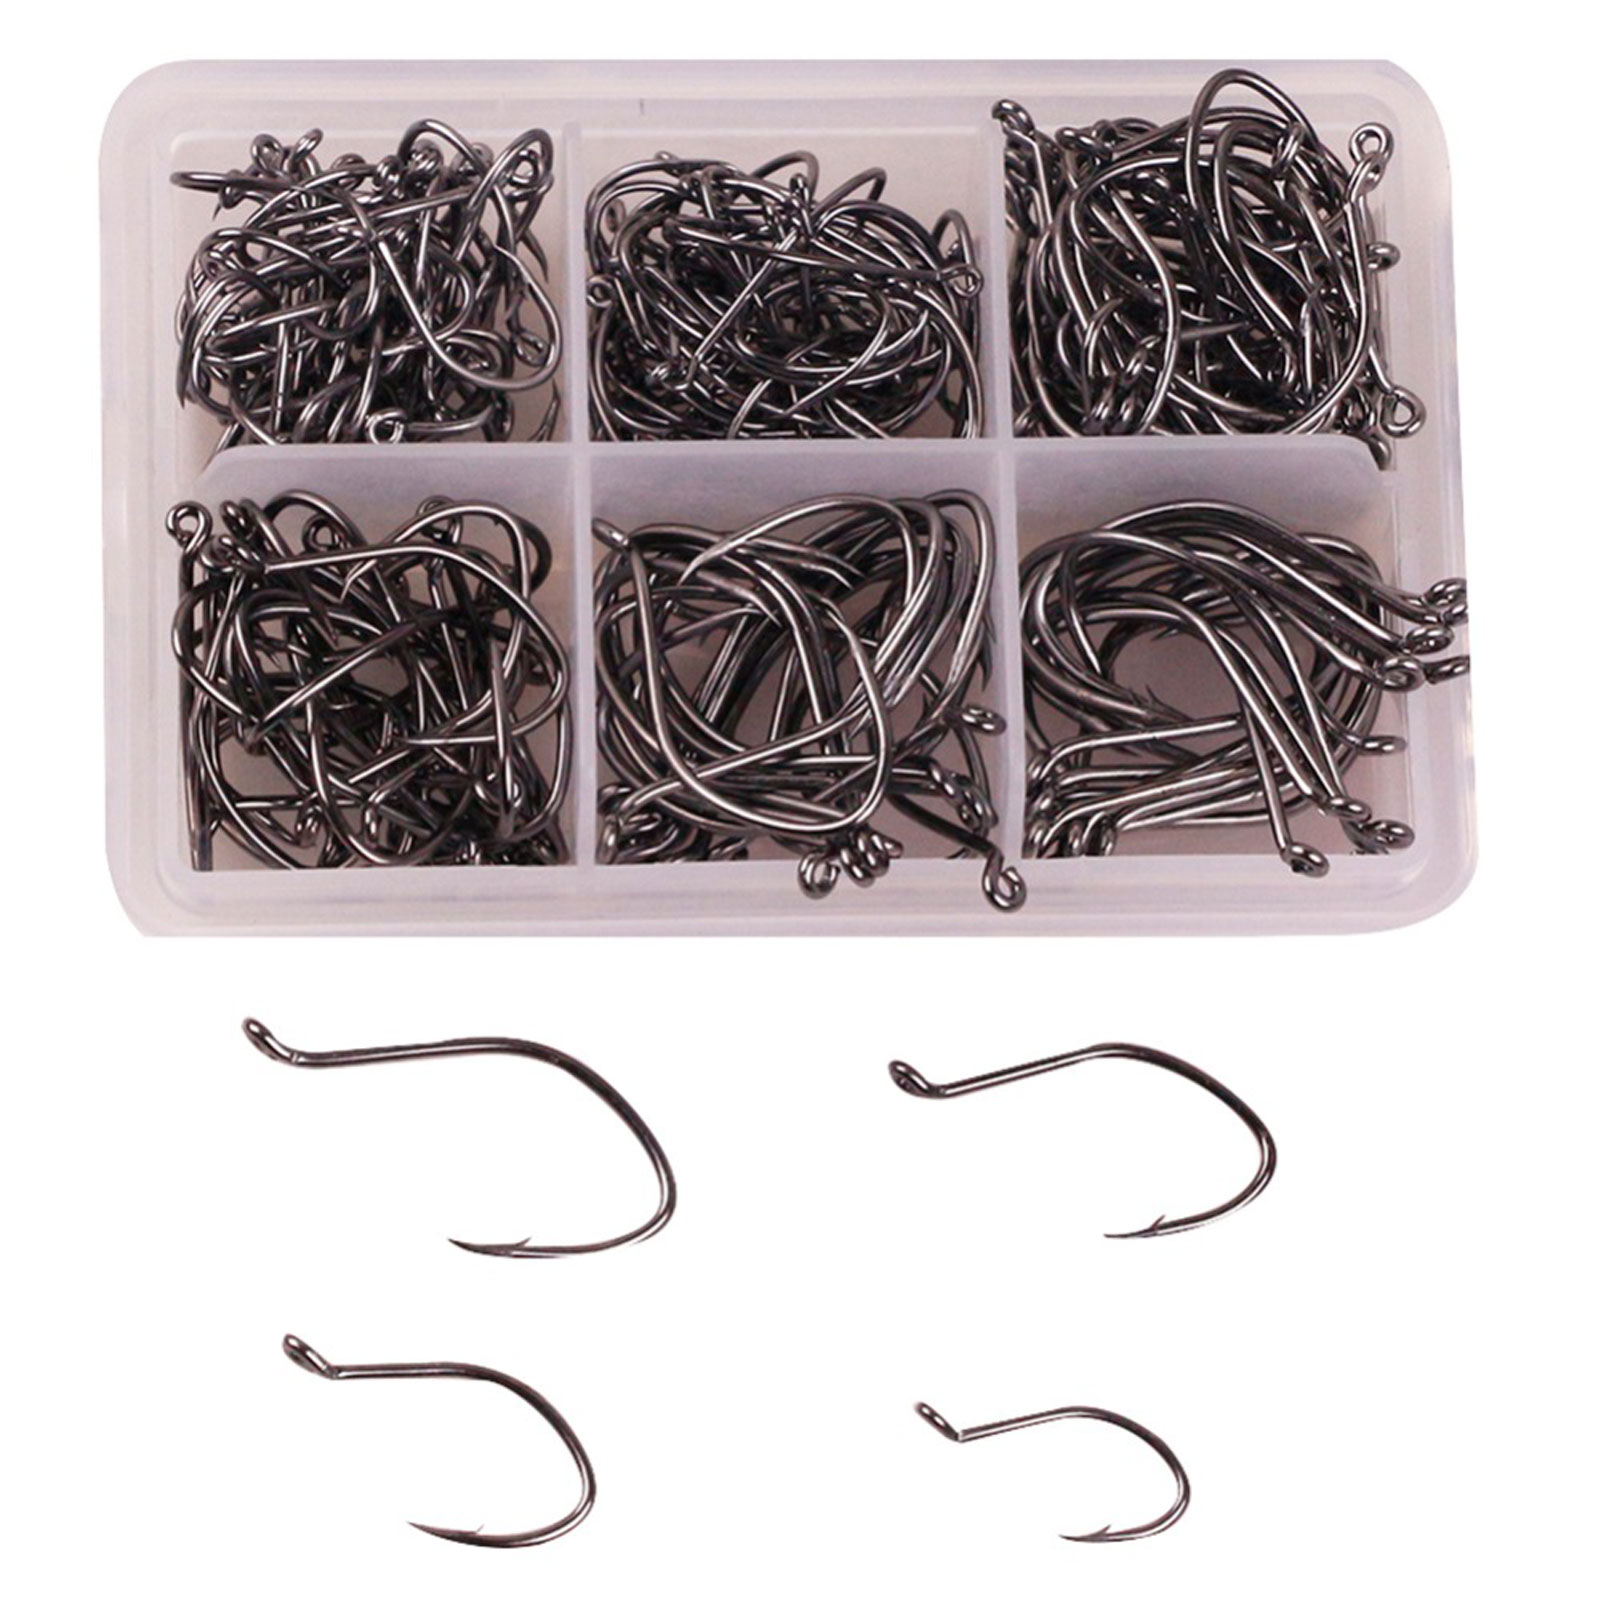 FREE FISHER 220Pcs Mixed Size 2-10# Carbon Steels 8832 Nickle Black Fishing Hooks Set with Box Fishing Tackle Tools Barbed Fishhooks